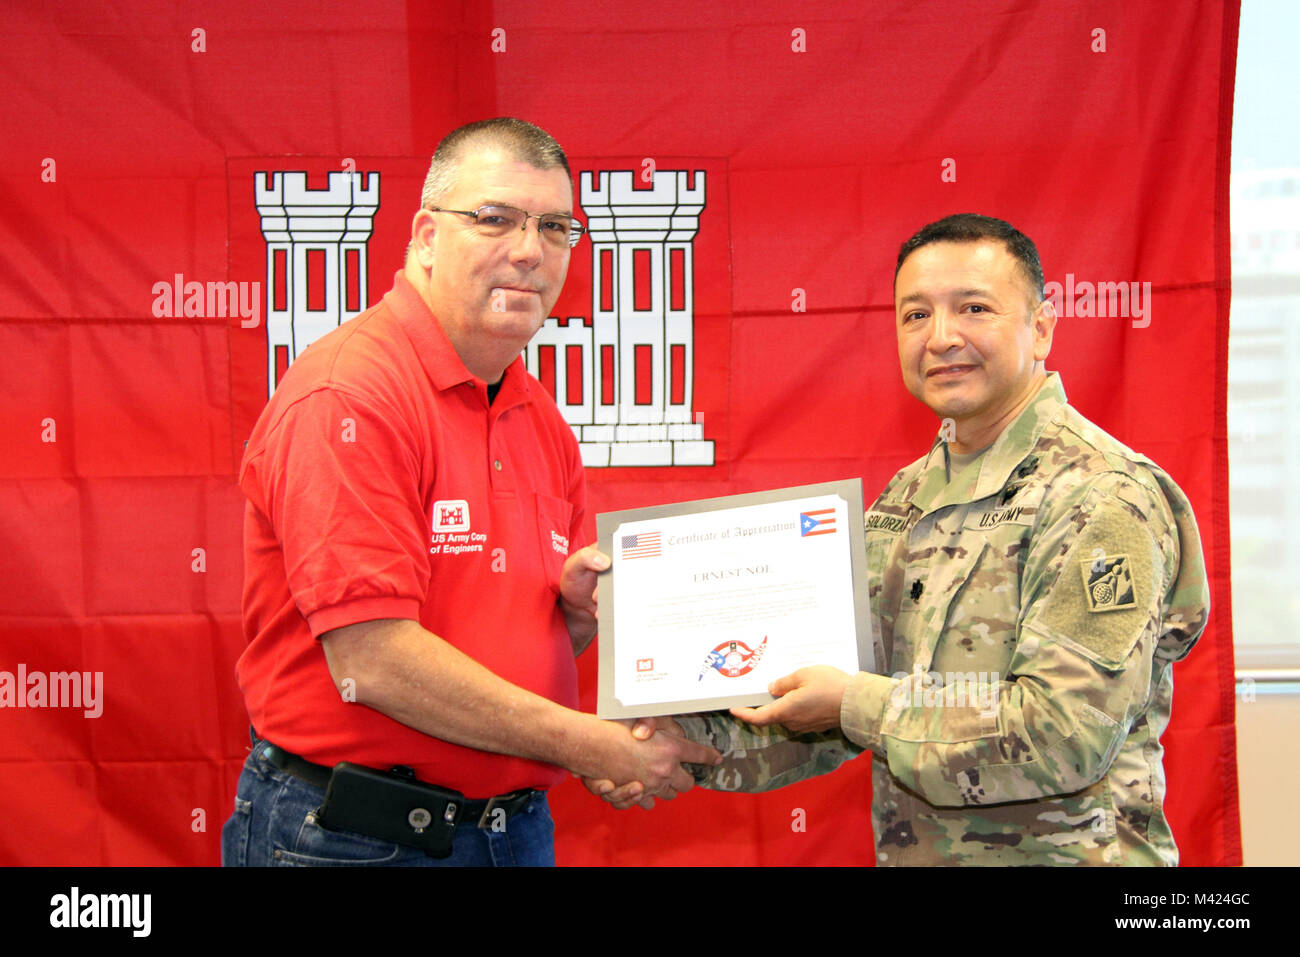 Ernest Noe, chief ranger for Mobile District's Lake Lanier, was recognized on February 10, 2018 by Recovery Field Office commander Lt. Col. Roberto Solorzano for his work while deployed to Puerto Rico for the U.S. Army Corps of Engineers Hurricane Maria/Hurricane Irma response. He is a resident of Dawsonville, Georgia. Stock Photo